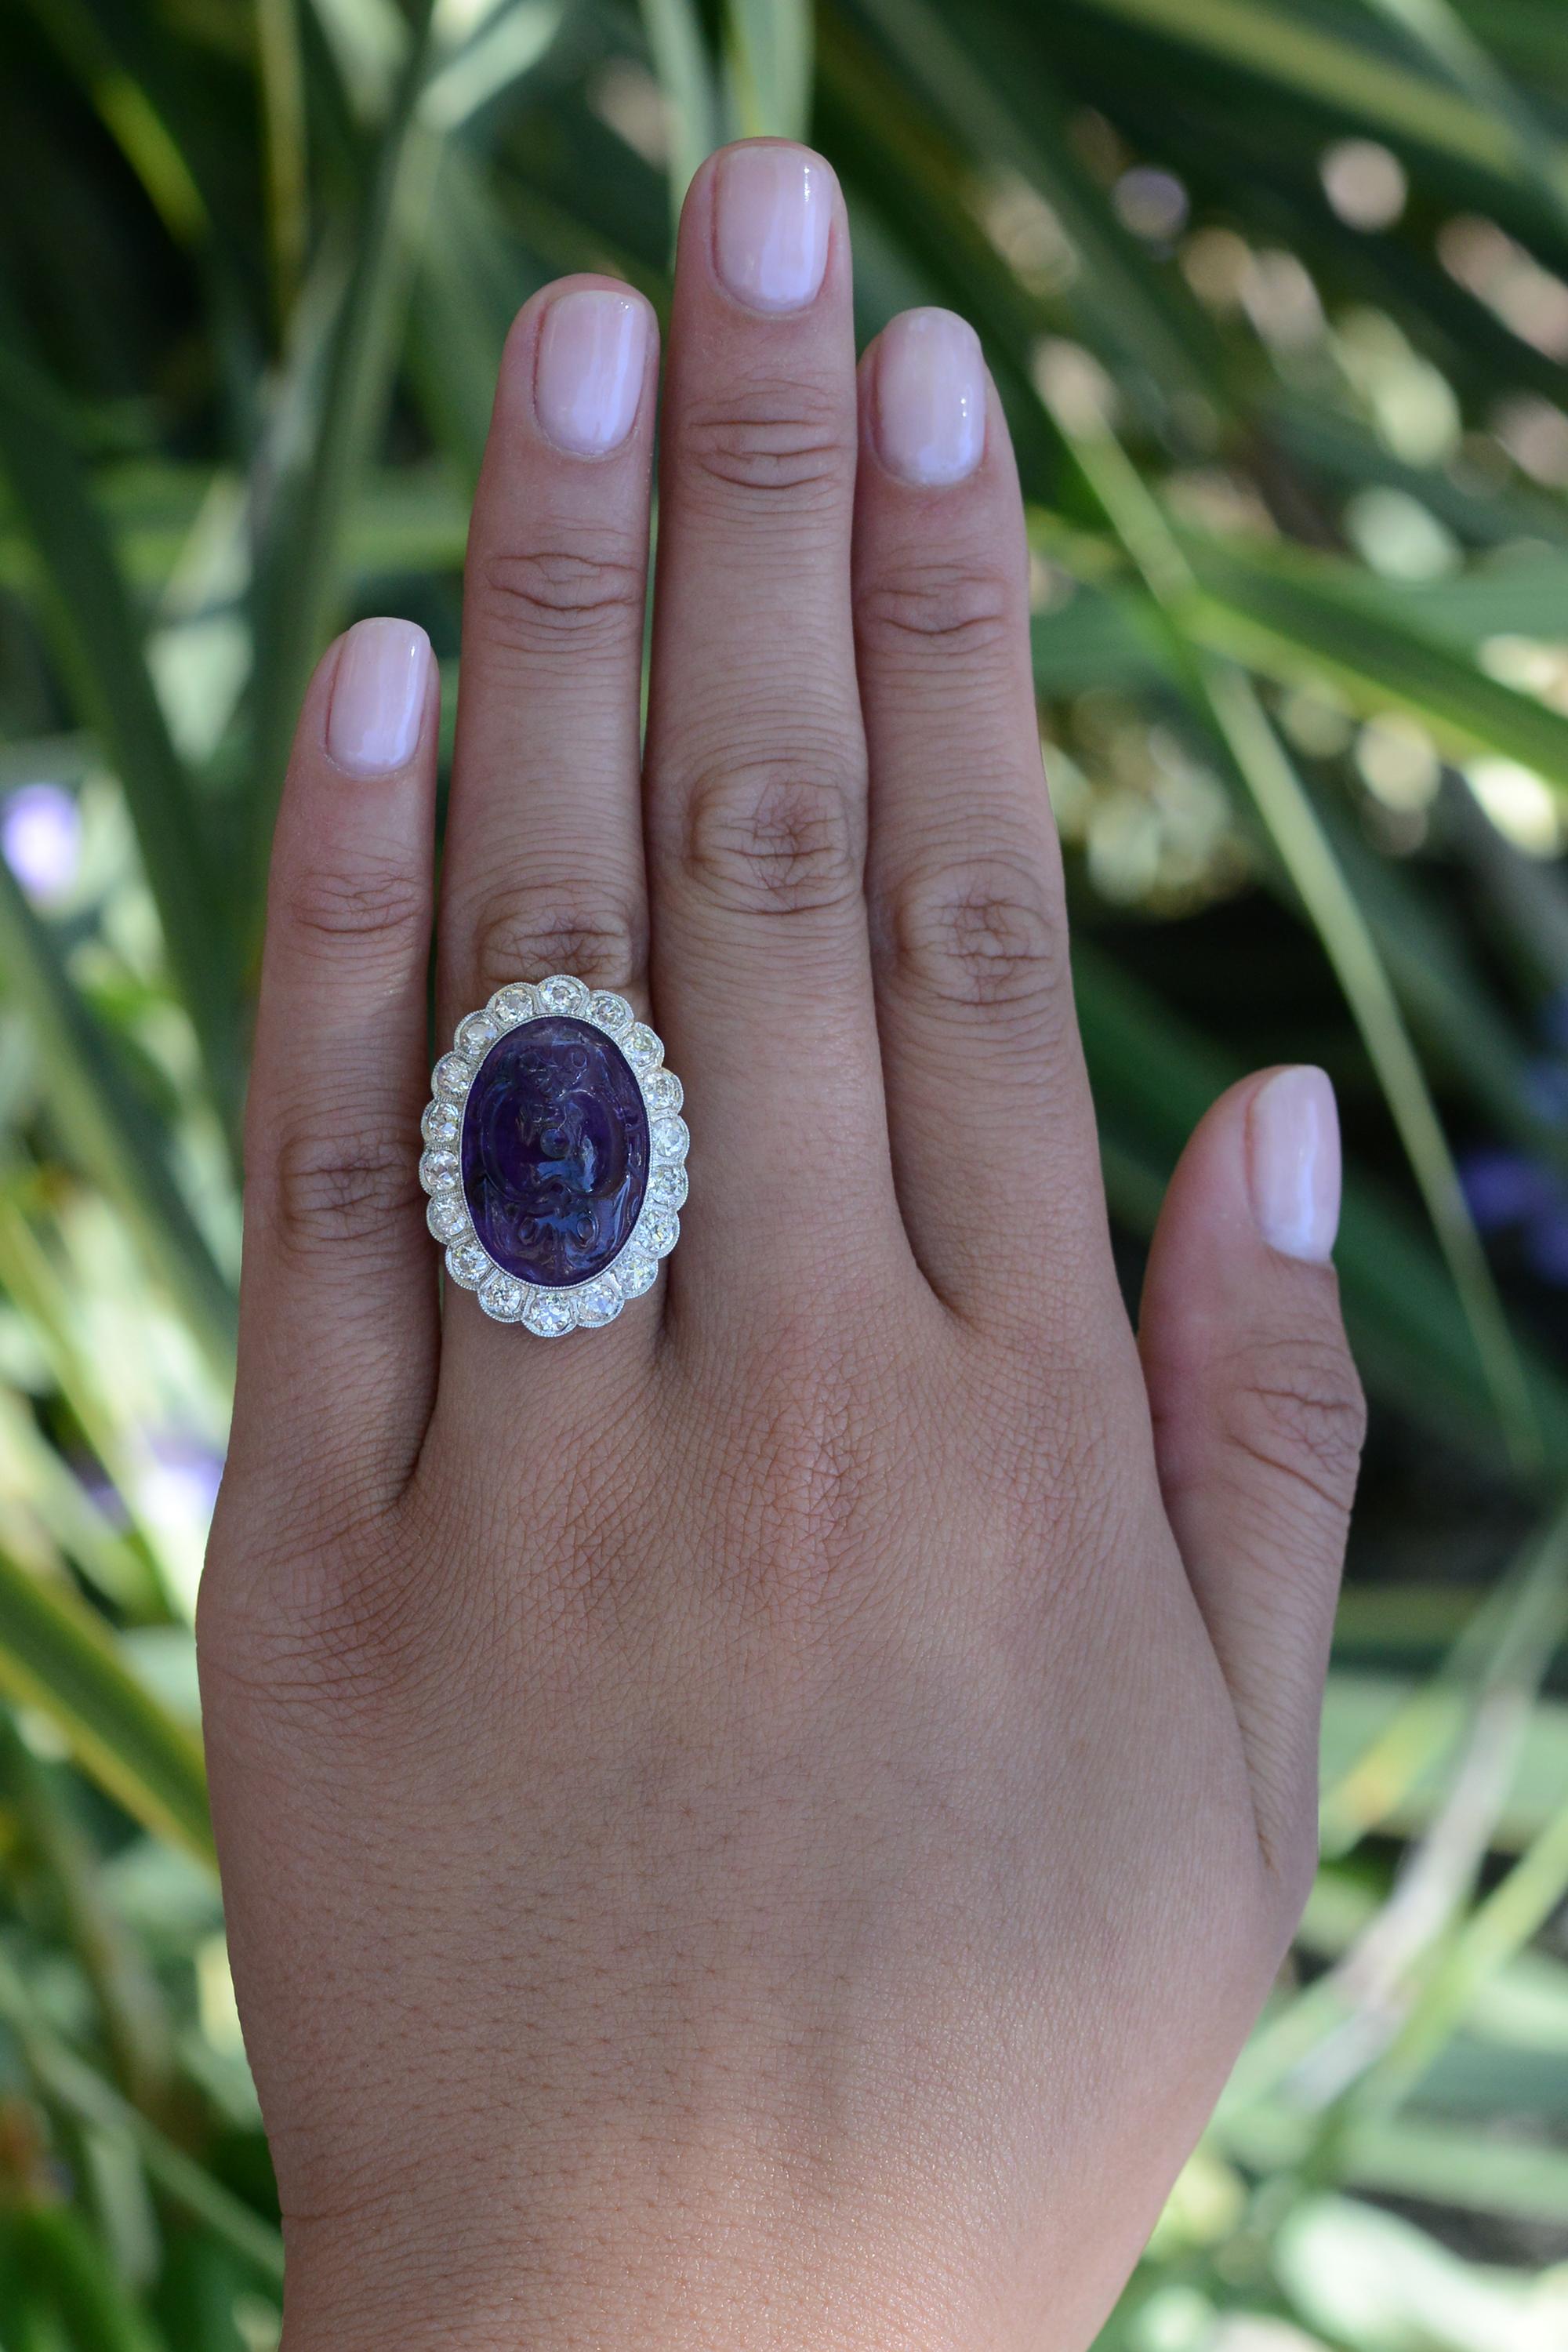 An exquisite vintage cocktail ring from the 1930s, concluding the grand Art Nouveau era. The centerpiece is a 16 carat amethyst, masterfully carved with two opposing bats, representing happiness. Gracing the gemstone is a scalloped halo adorned with